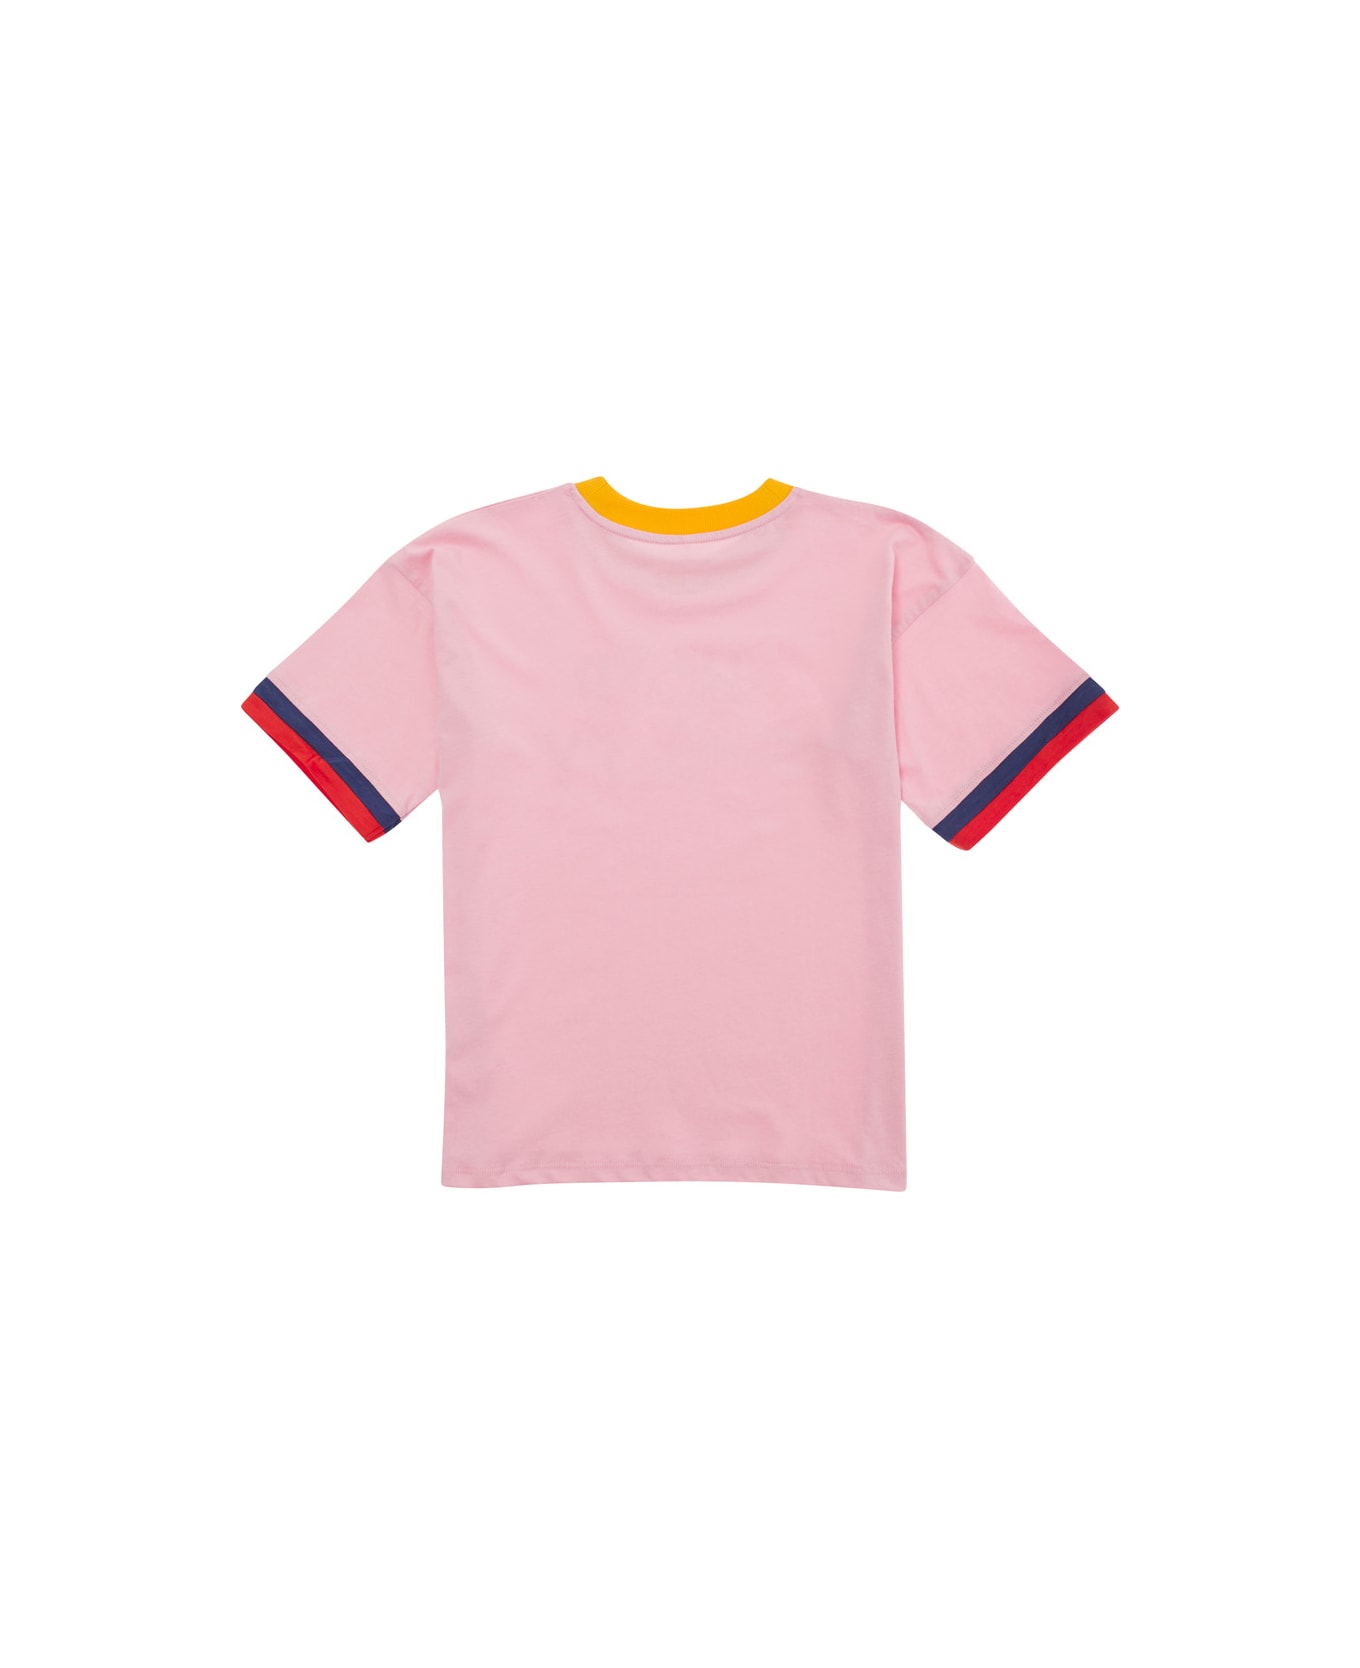 Mini Rodini Pink T-shirt With Super Sporty Print In Cotton Boy - Pink Tシャツ＆ポロシャツ